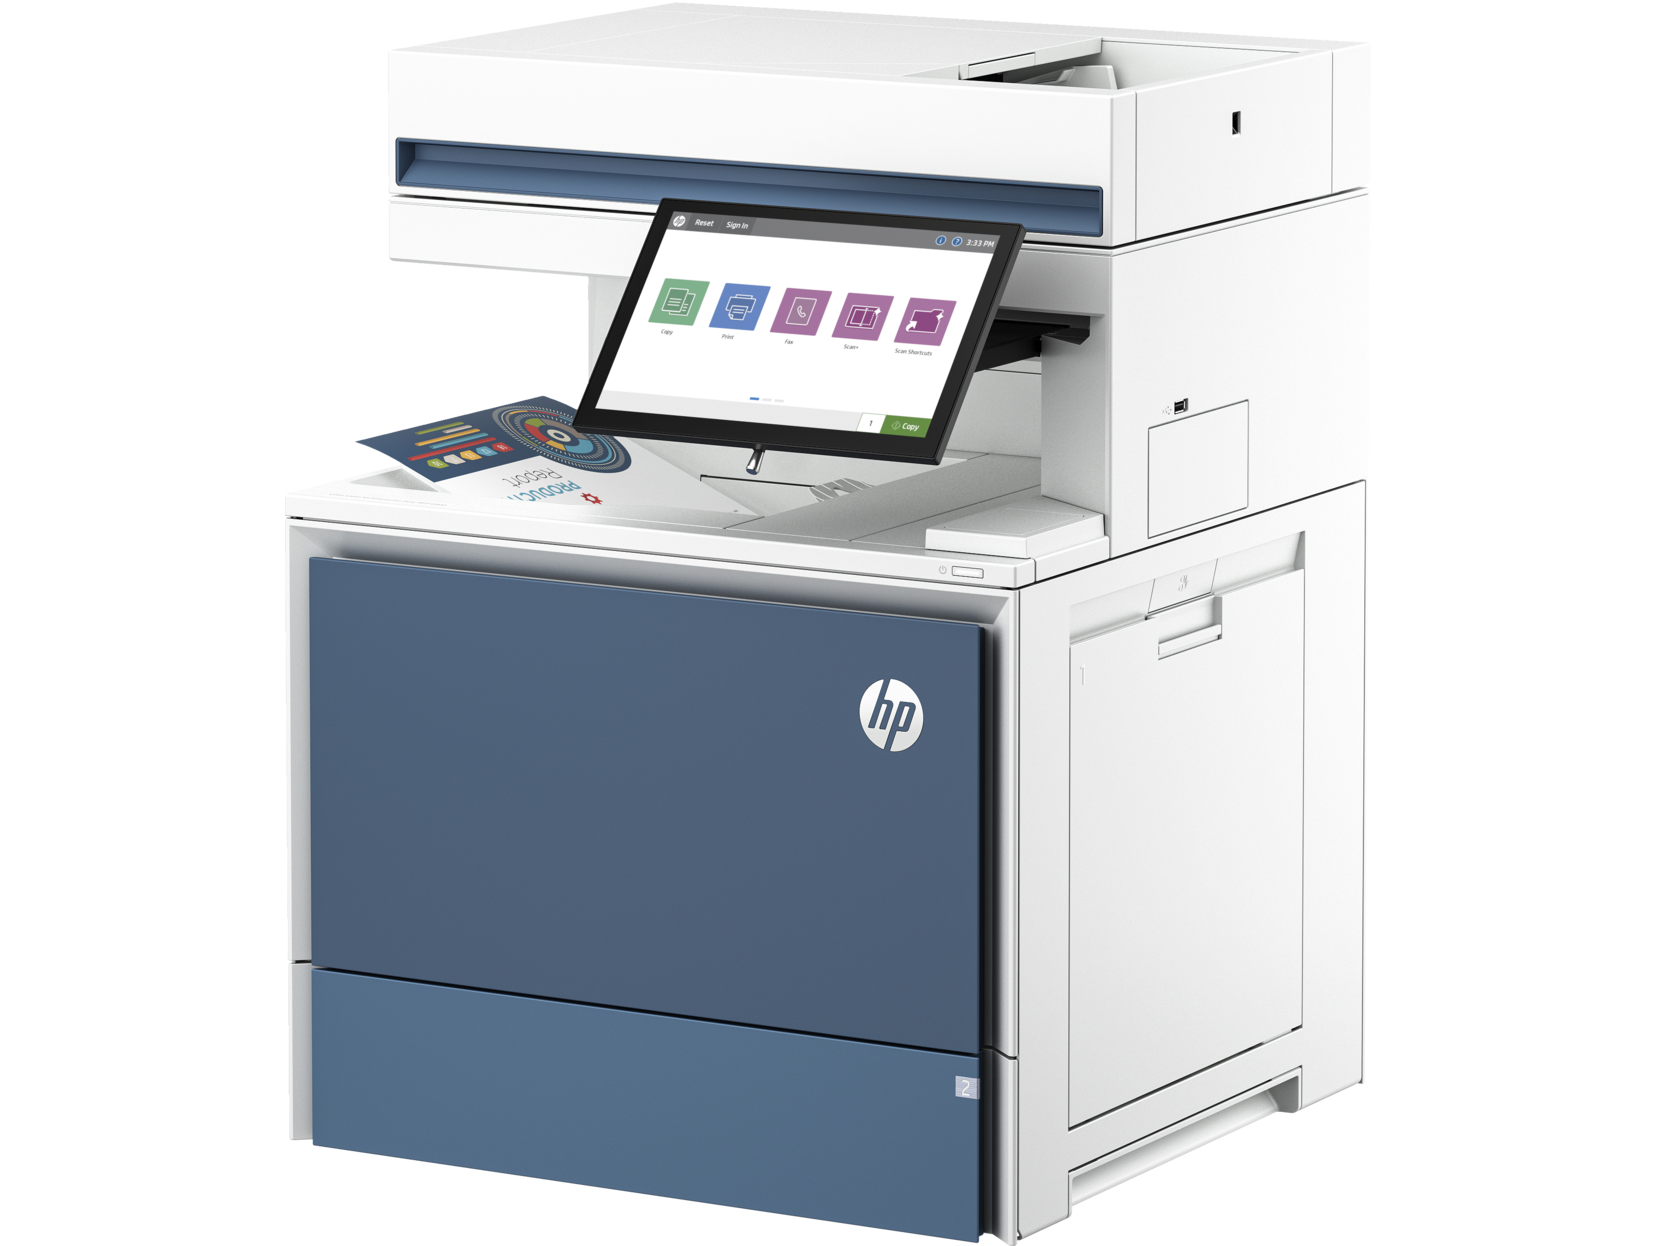 Lease Printer in Port St. Lucie